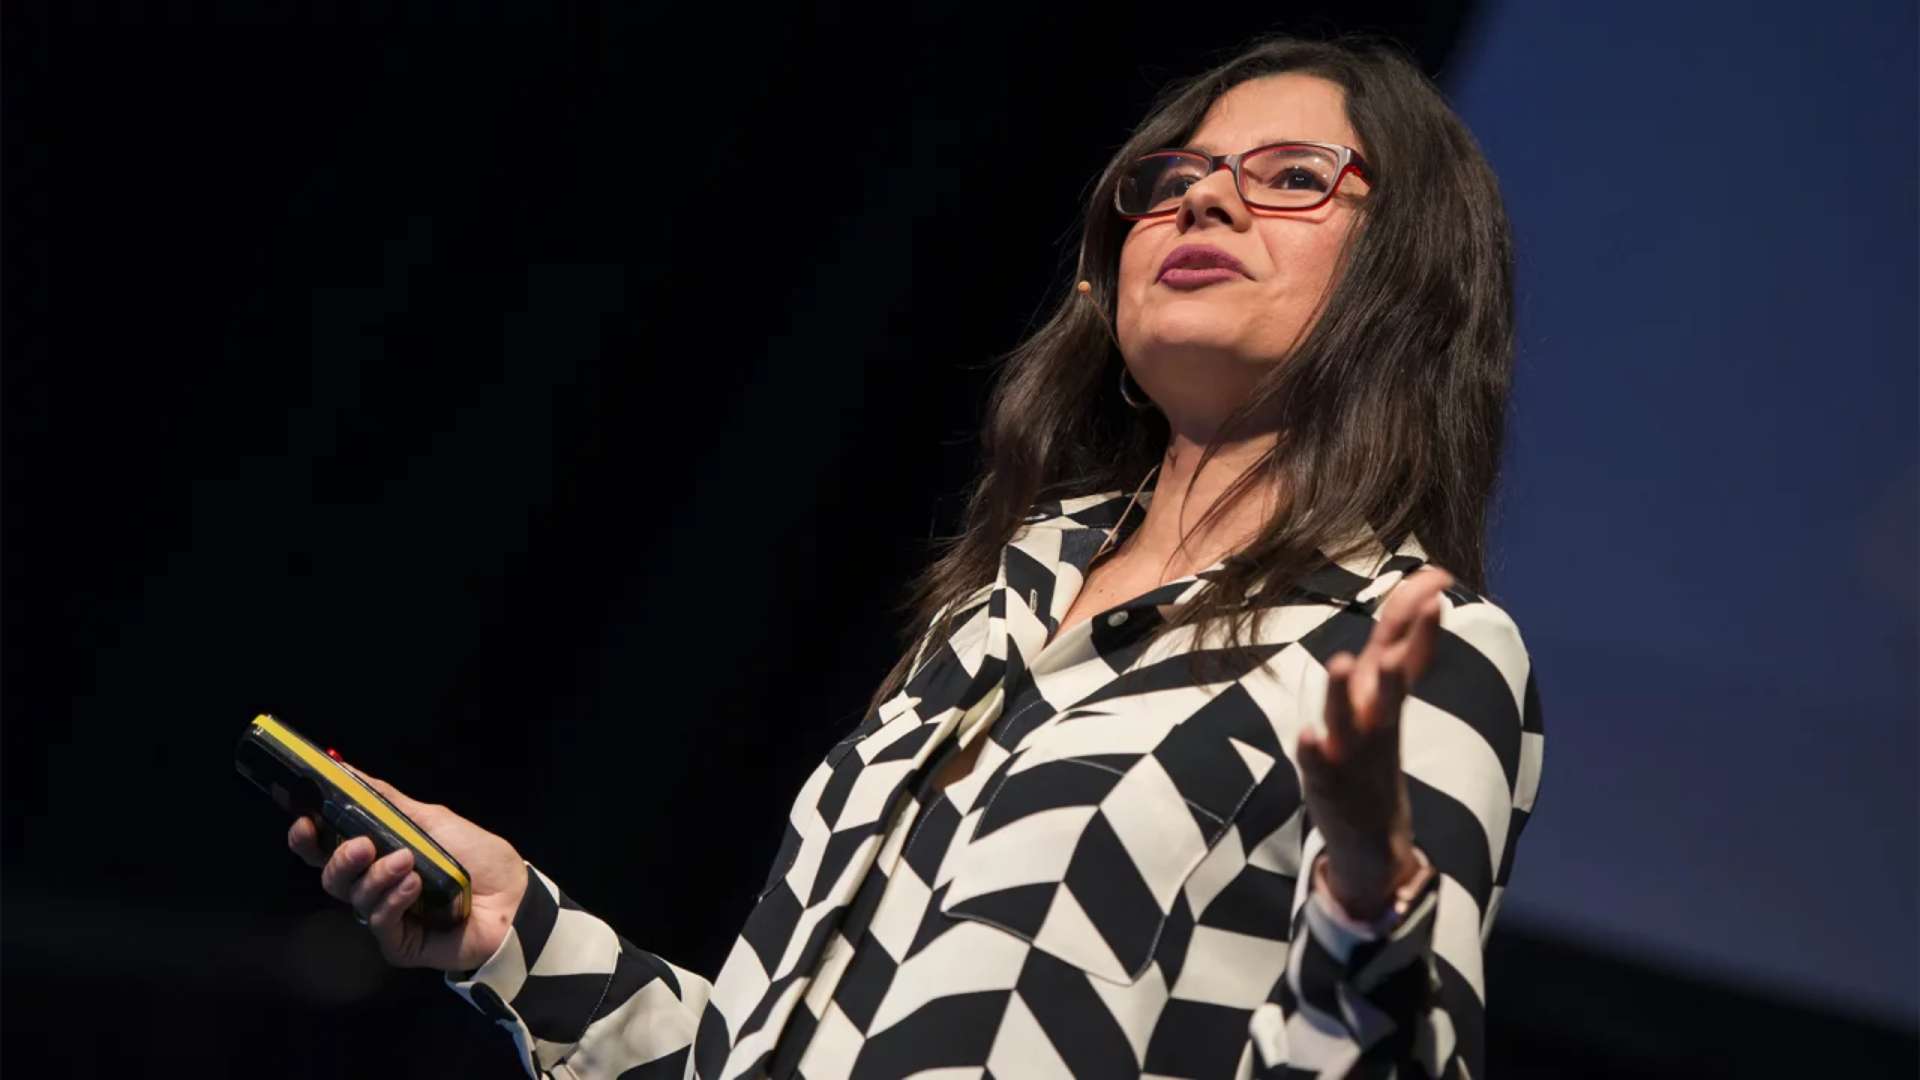 Aleyda Solís, wearing a black and white striped shirt and red framed glasses, standing on a stage doing a talk.